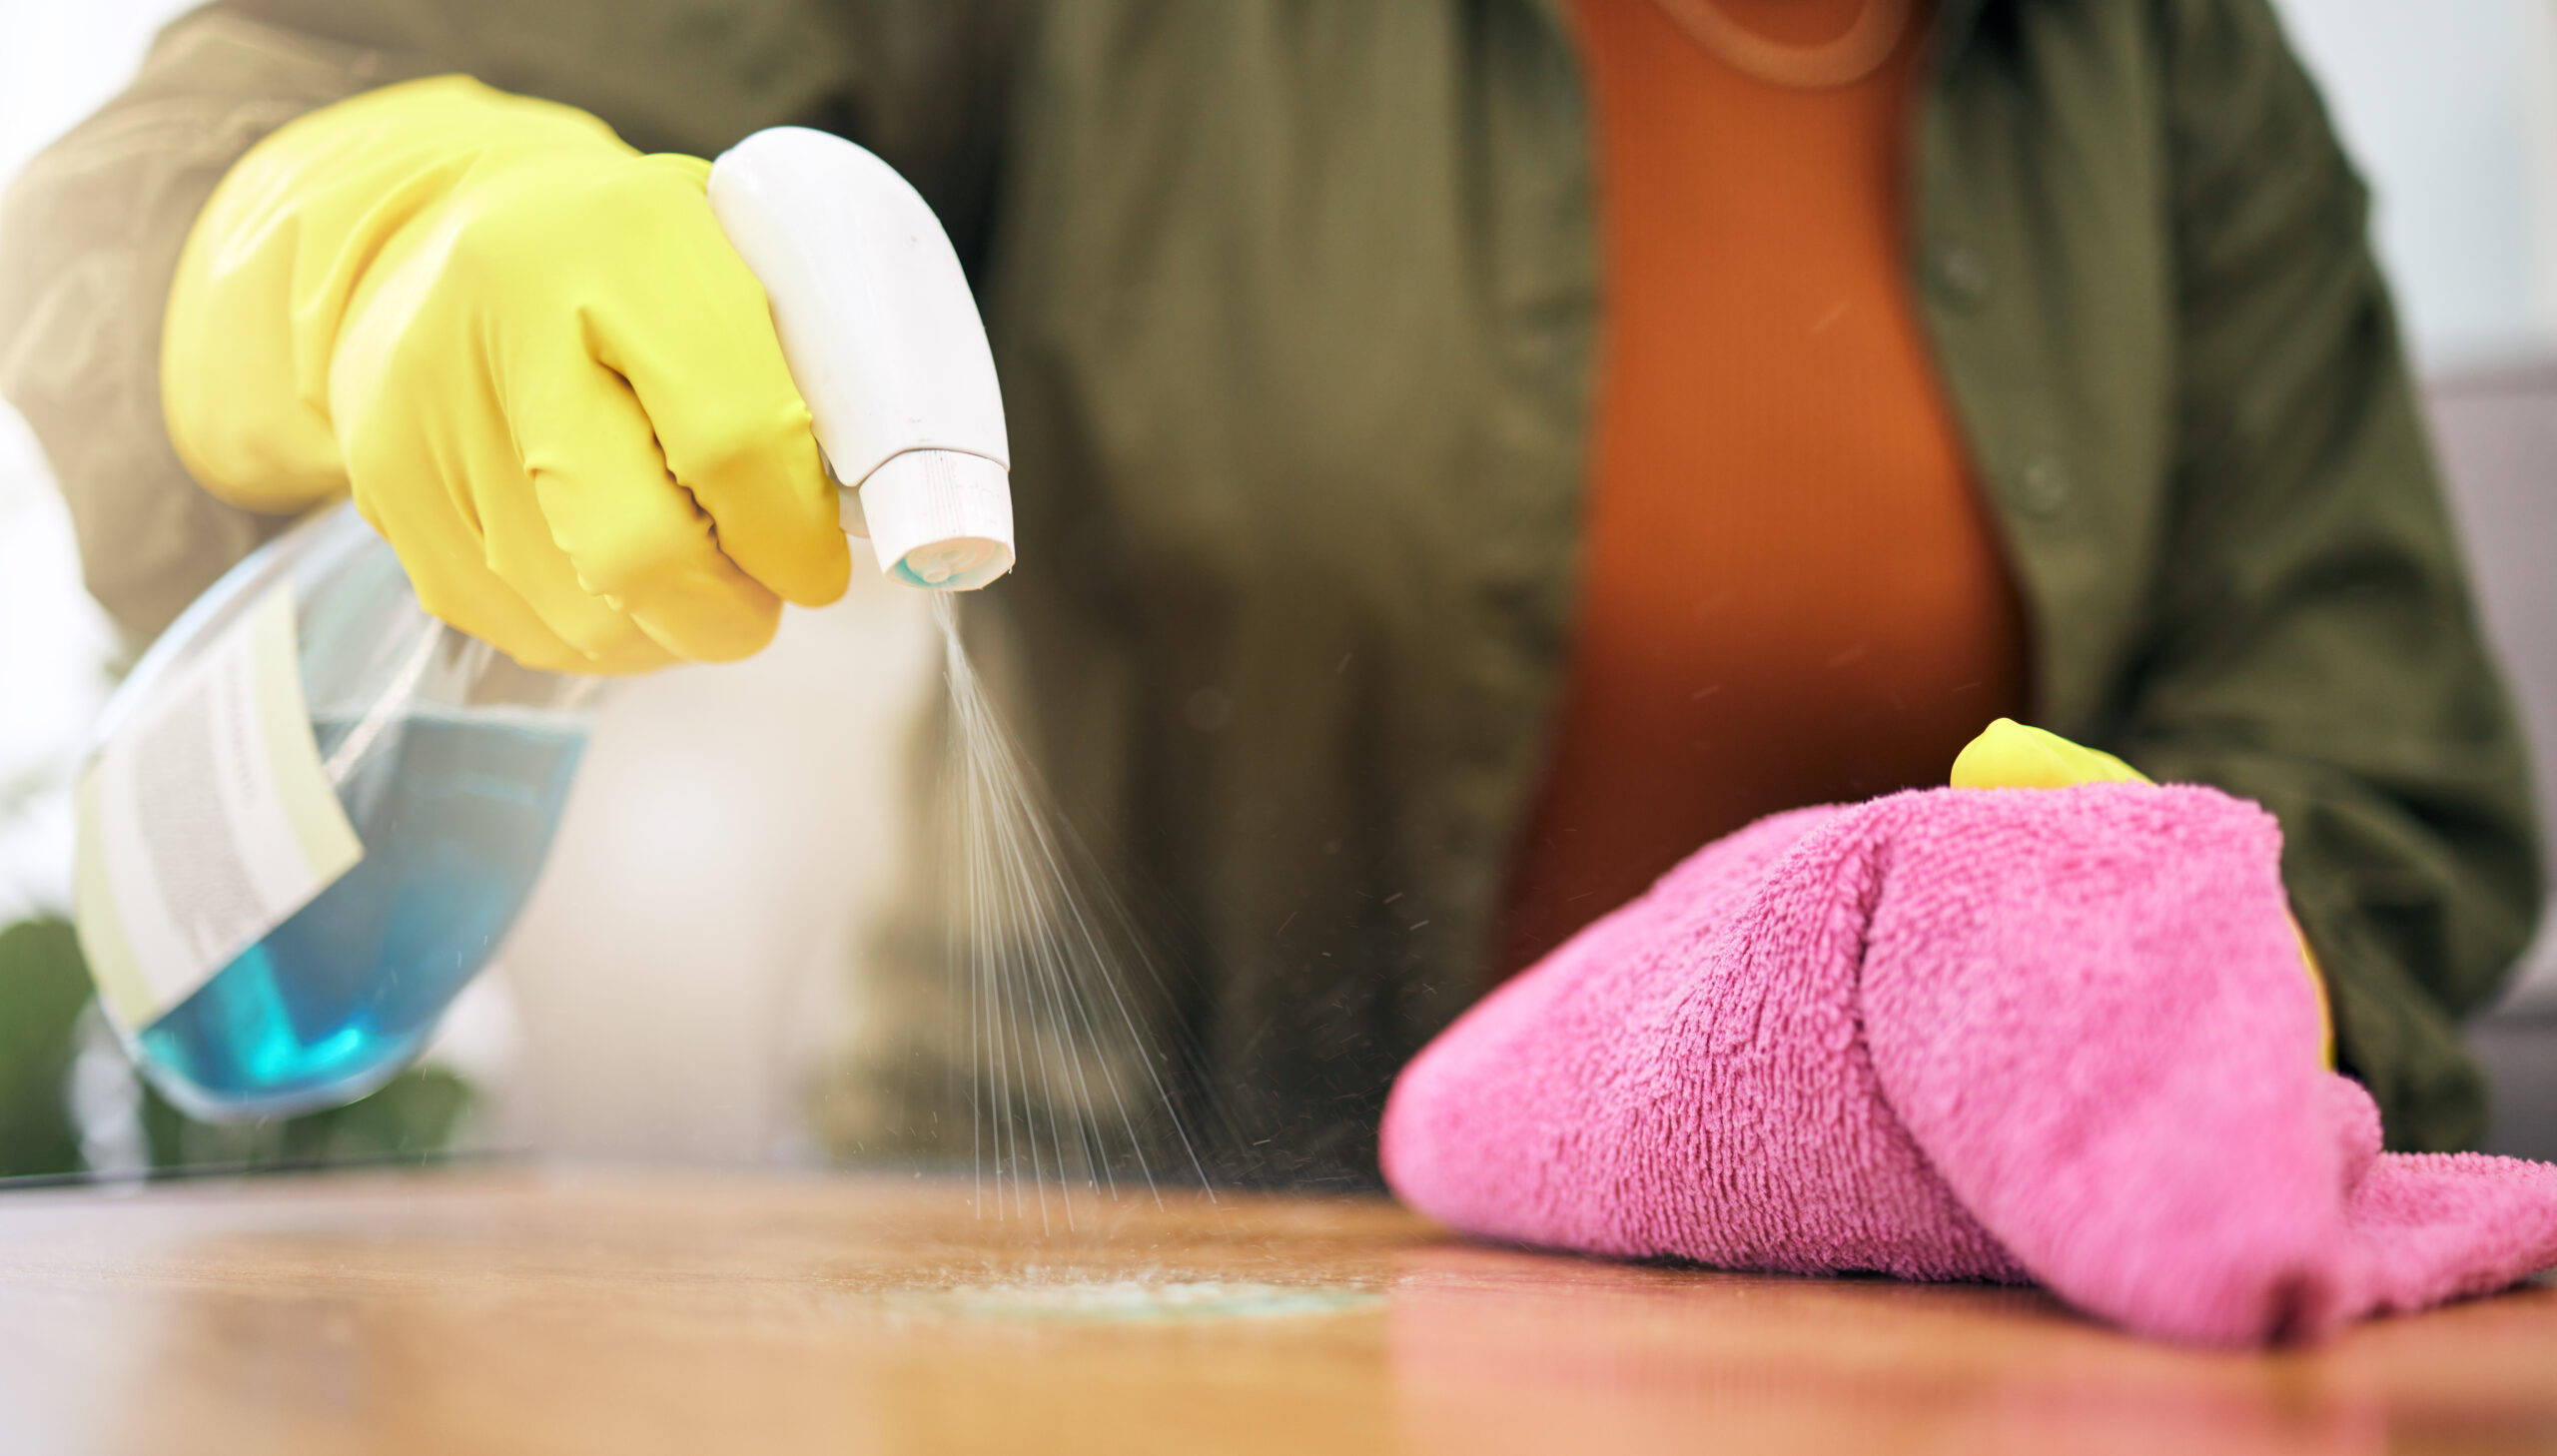 Woman, Hands And Spray On Table With Cloth For Hygiene, Bacteria Or Germ Removal At Home. Closeup Of Female Person, Housekeeper Or Maid Wiping Furniture In Domestic Service Or Disinfection On Surface